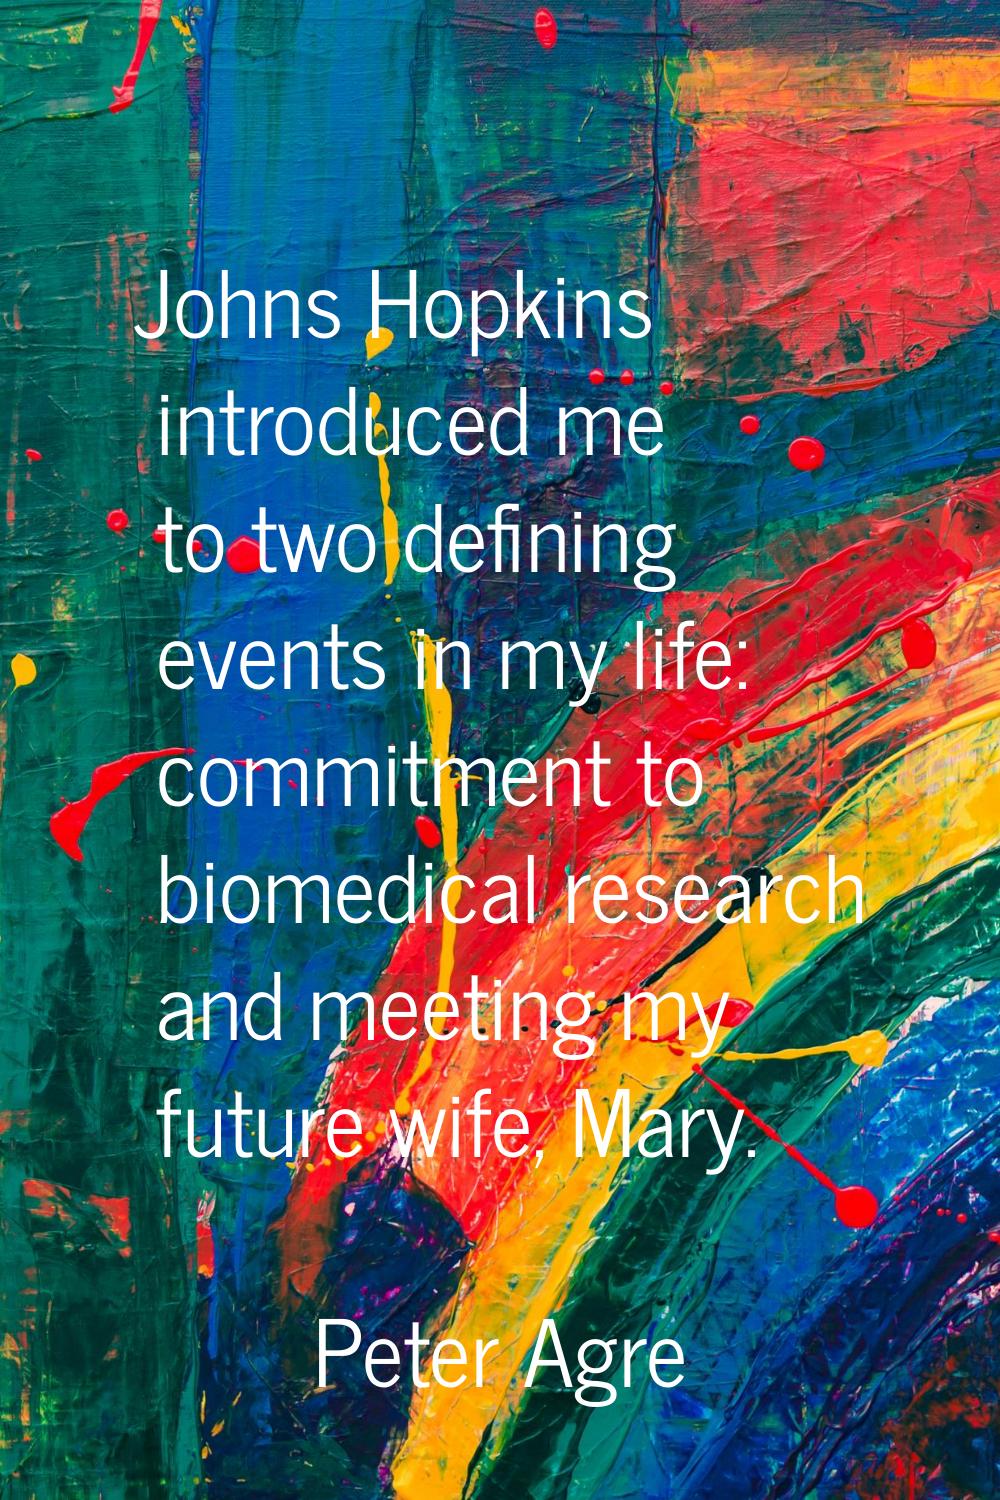 Johns Hopkins introduced me to two defining events in my life: commitment to biomedical research an